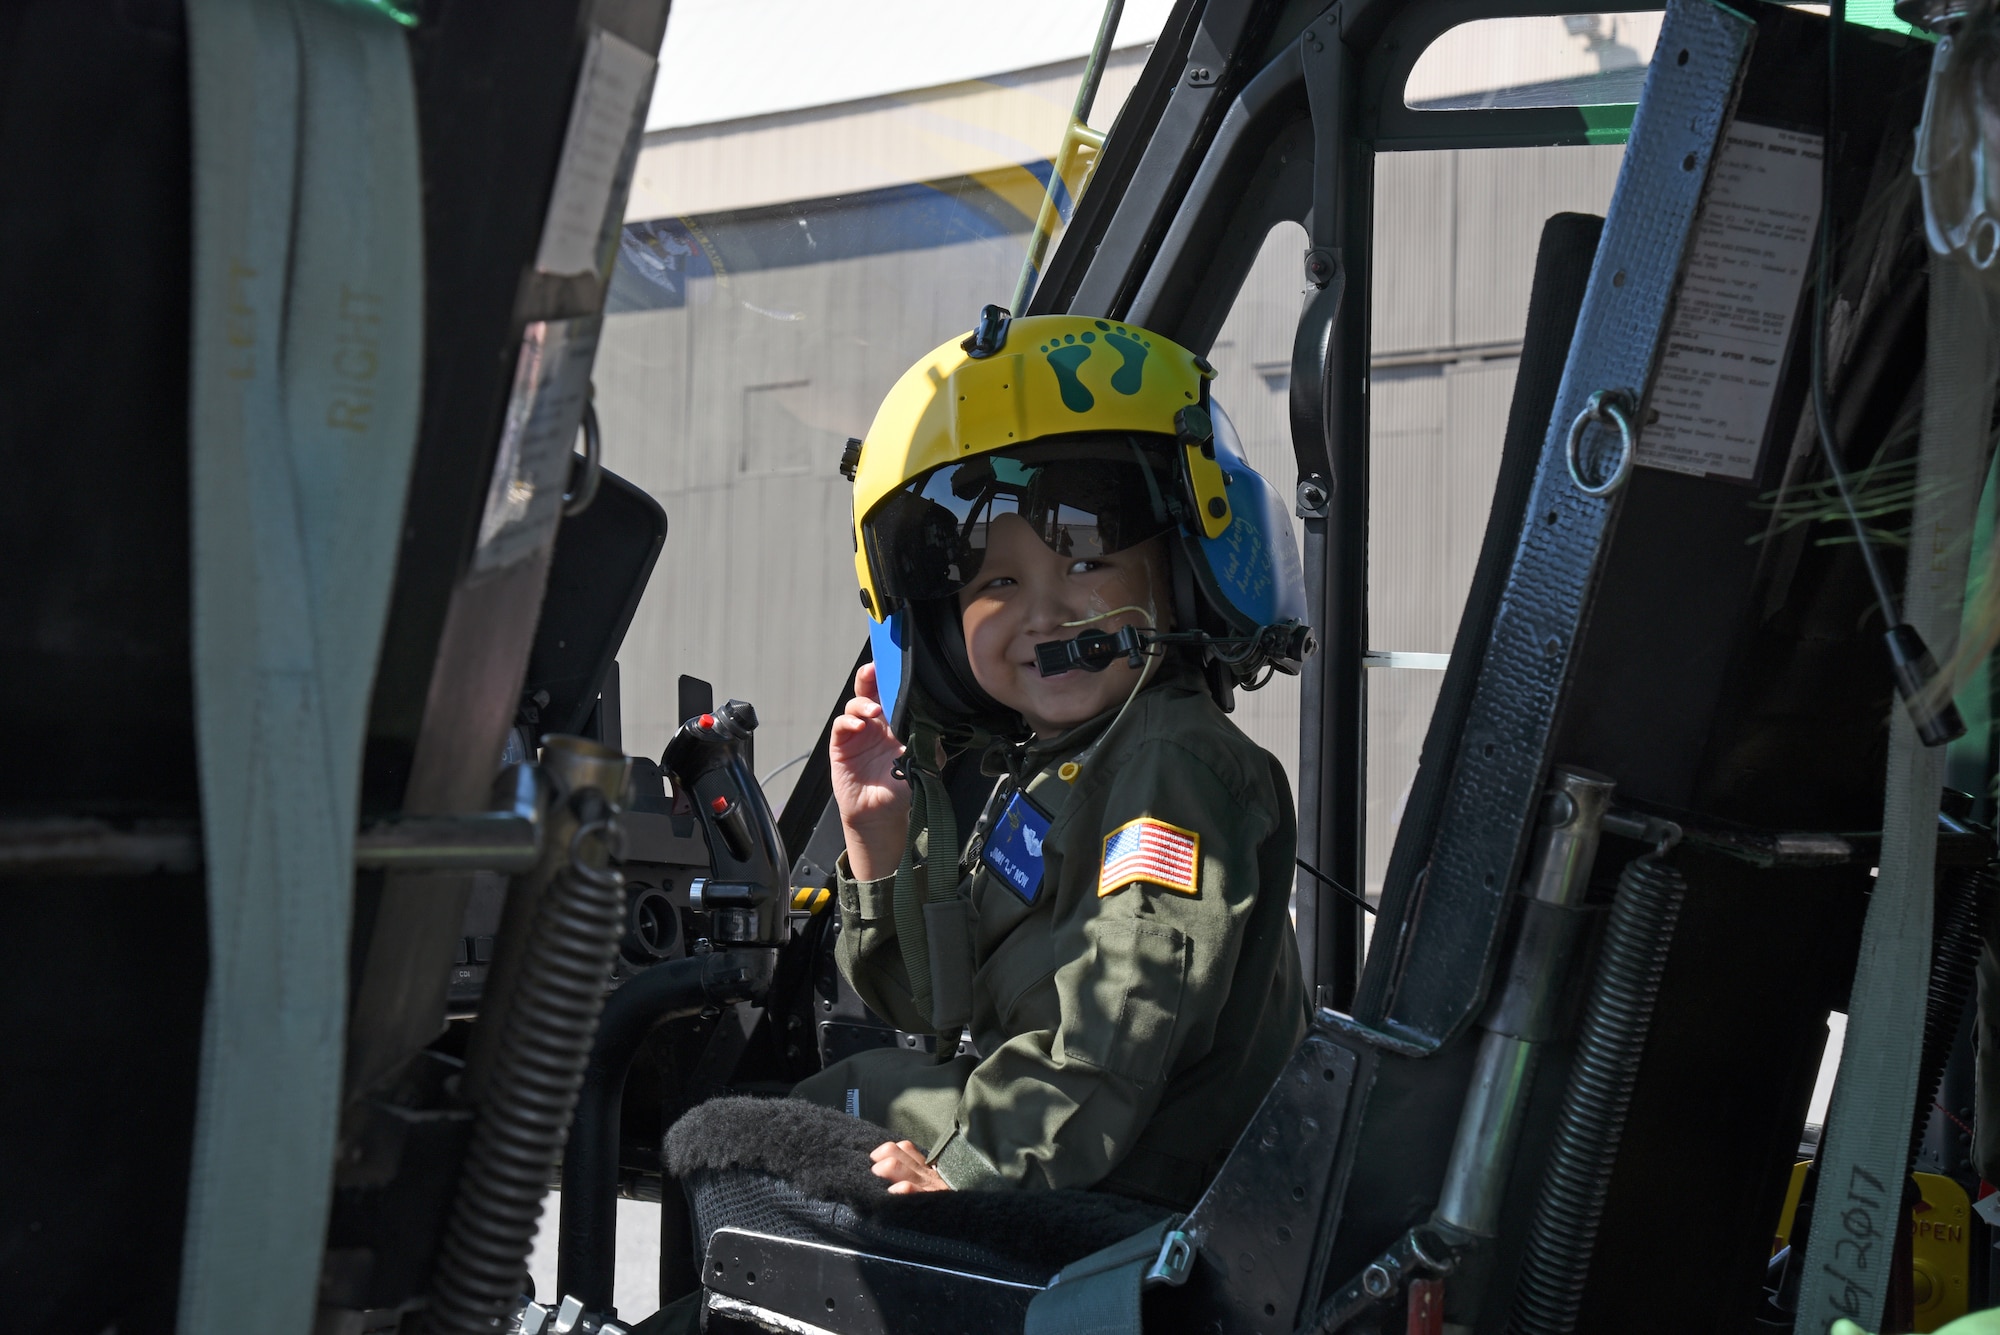 Jimmy "LJ" Now smiles at his mother, Samantha Now, as he explores a UH-1N Huey assigned to the 36th Rescue Squadron during a visit Sept. 7, 2018, at Fairchild Air Force Base, Washington. As part of his bucket list, LJ wanted to experience the life of a helicopter pilot. (U.S. Air Force photo/Staff Sgt. Mackenzie Mendez)